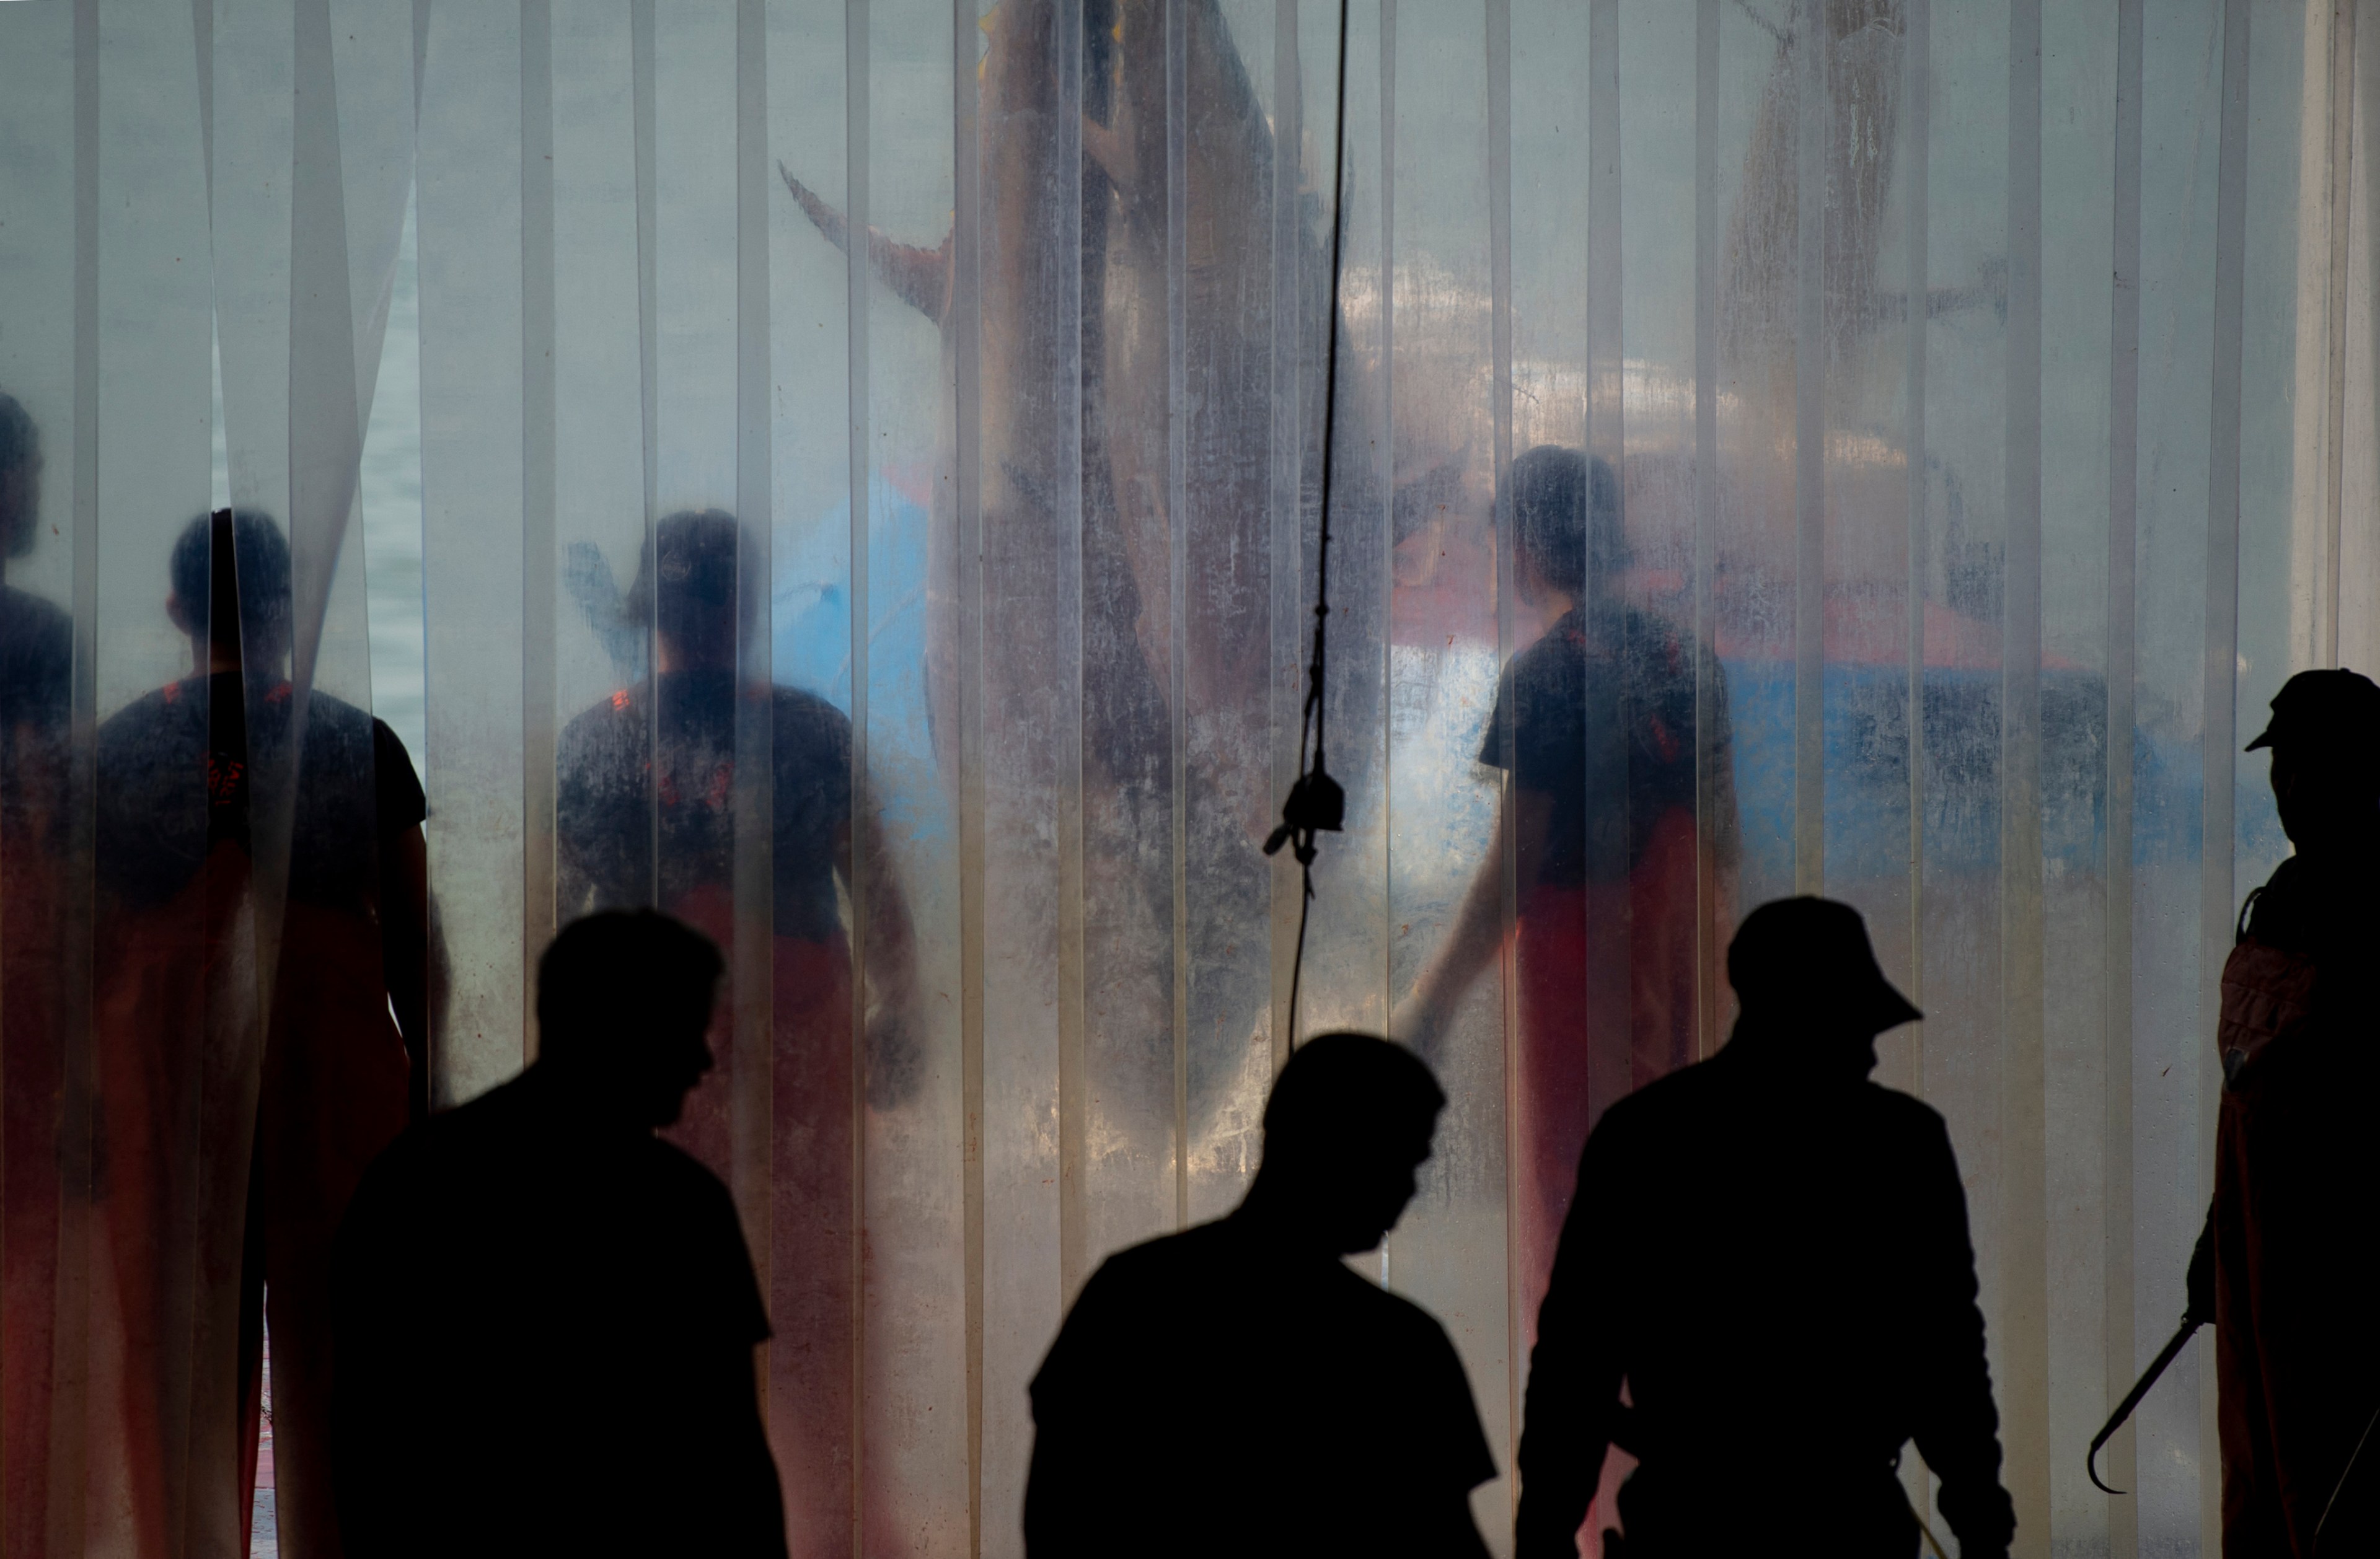 Silhouetted figures stand behind and in front of a transparent plastic curtain, obscuring their features; a large fish or marine creature is visible in the background.